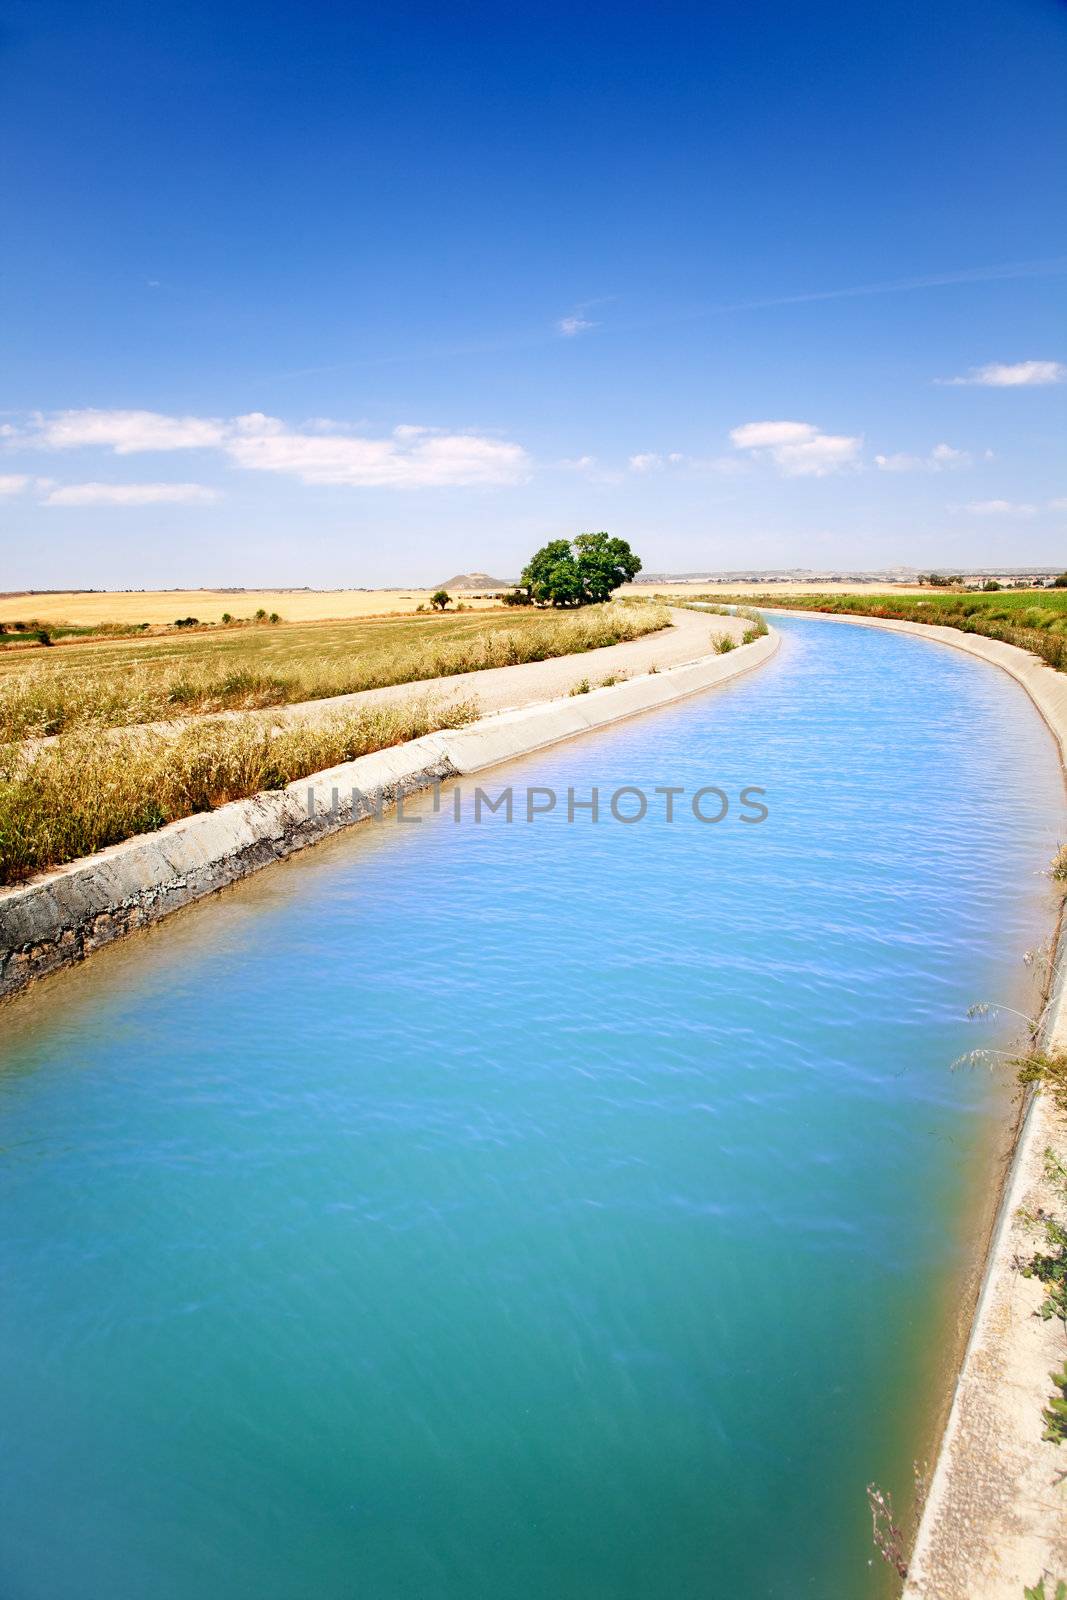 Landscape with irrigation water channel and tree